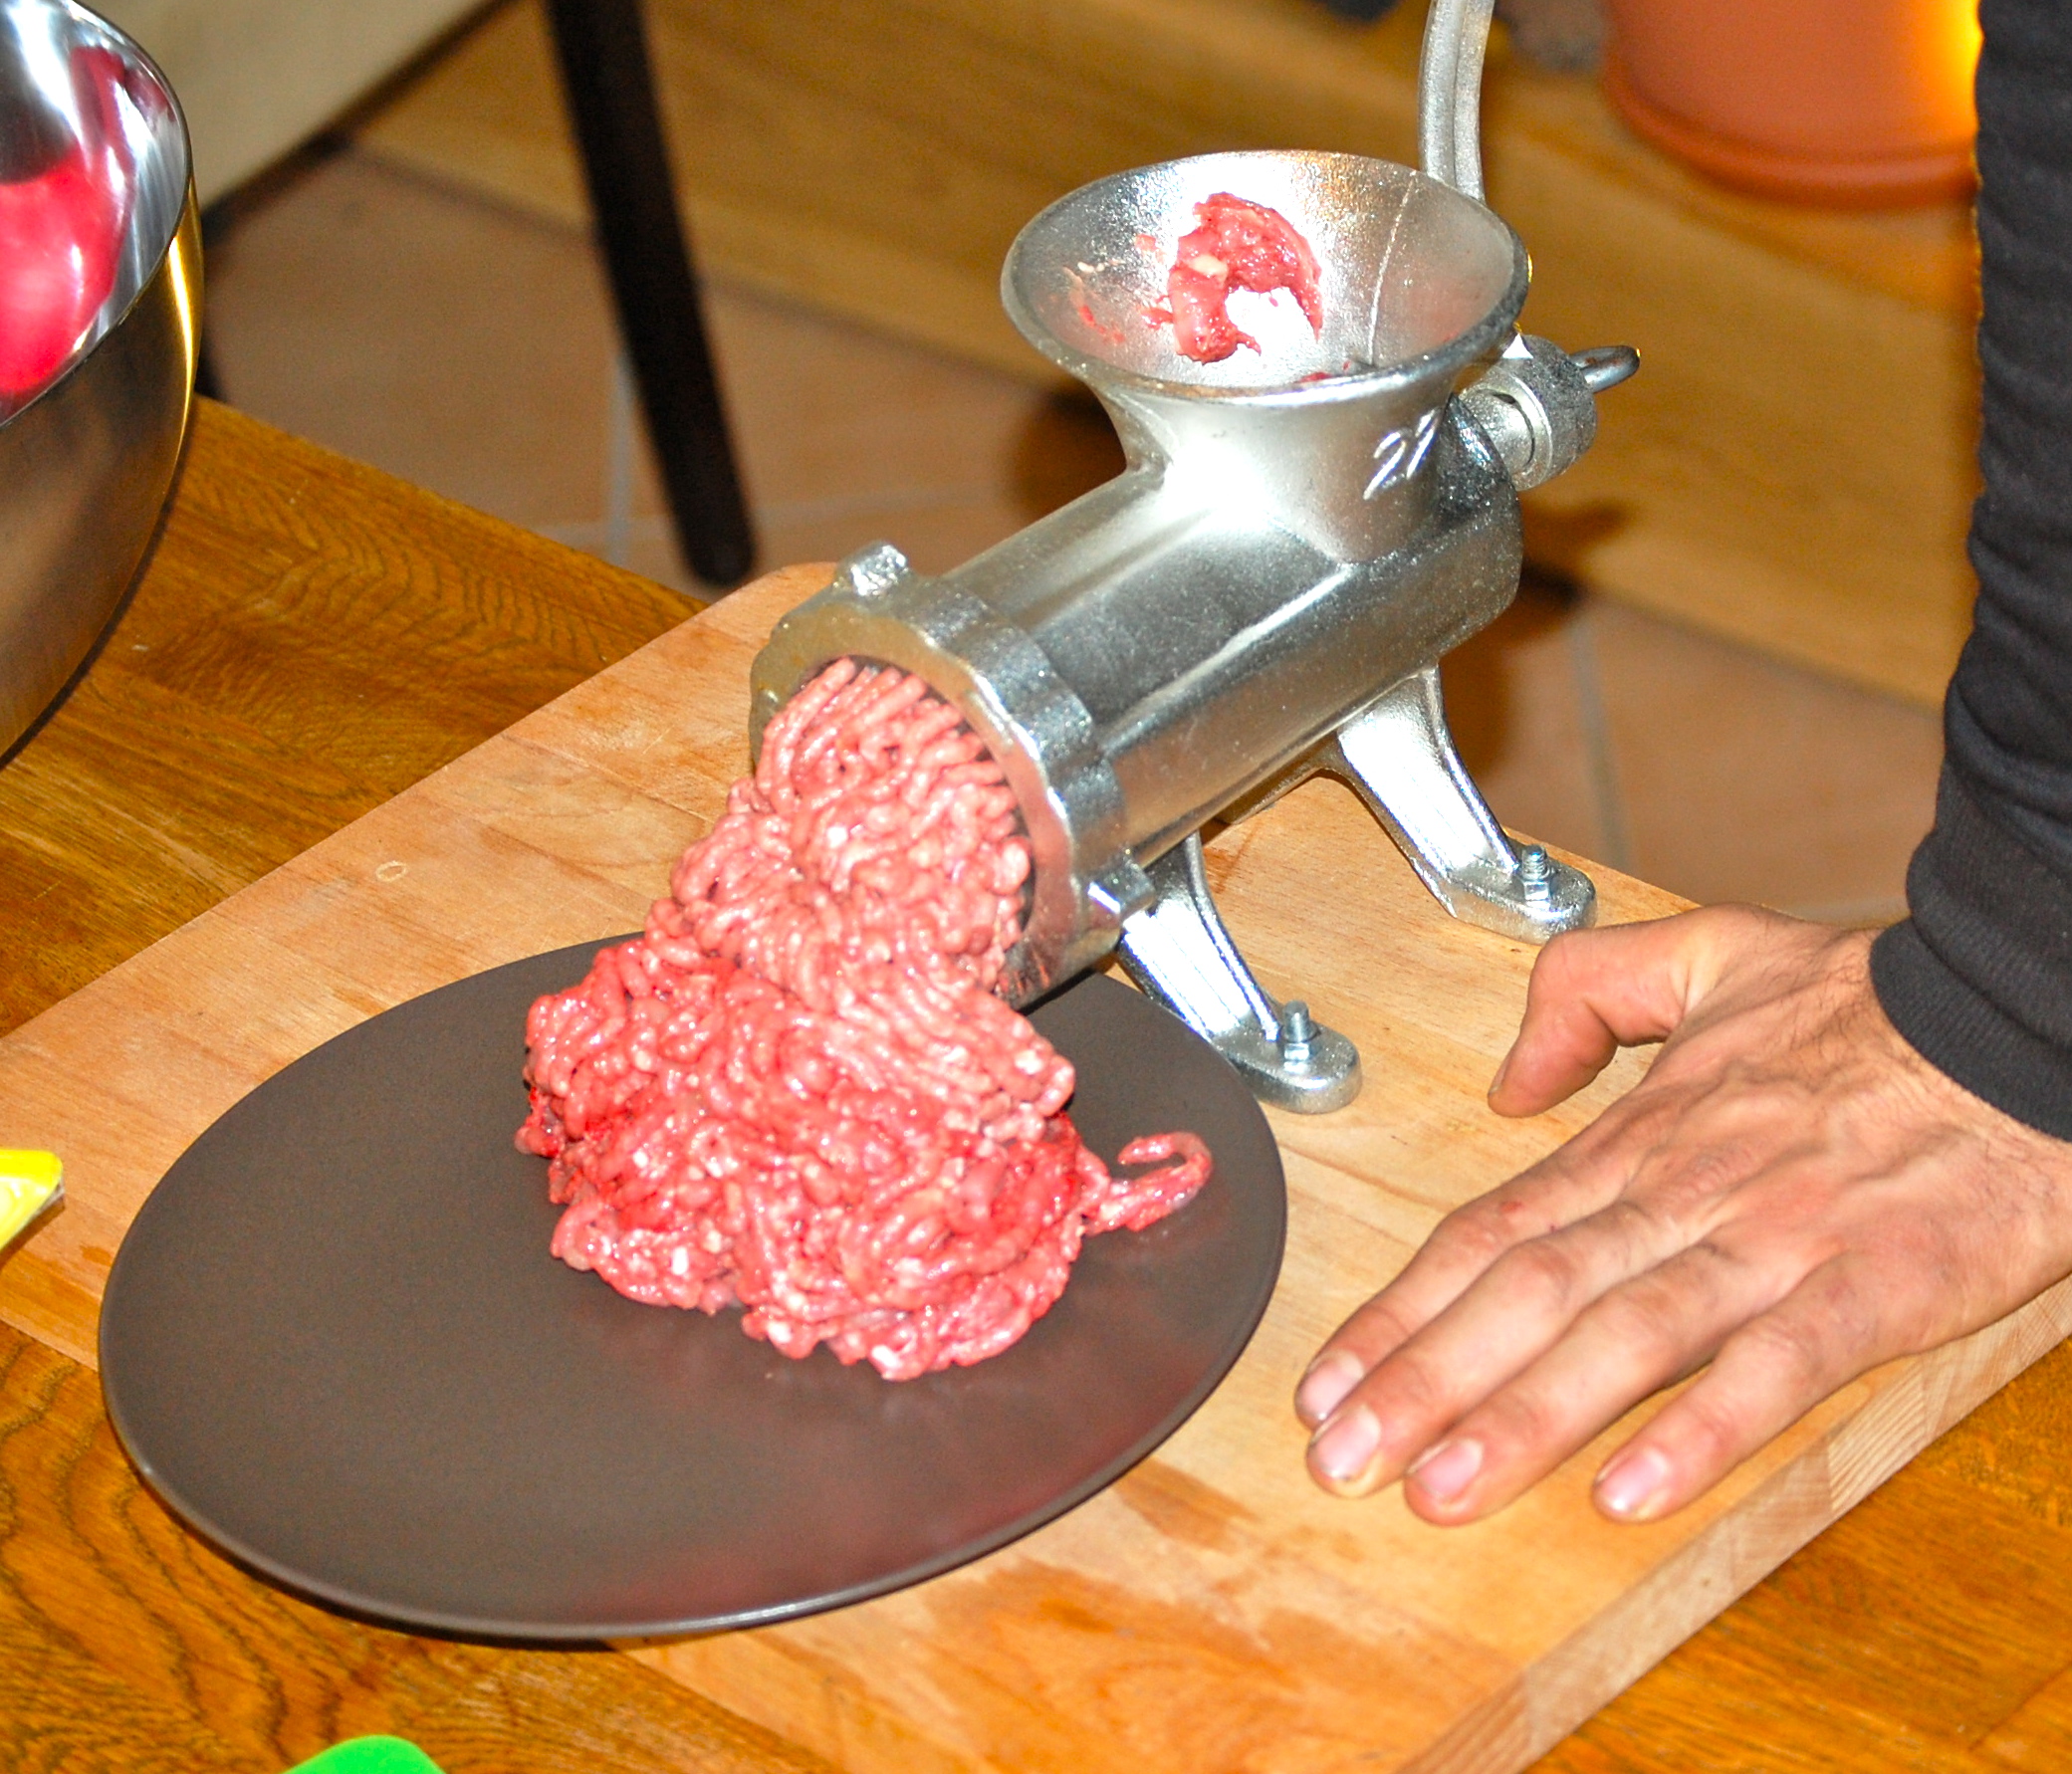 How To Use A Meat Grinder To Make Homemade Pet Food 